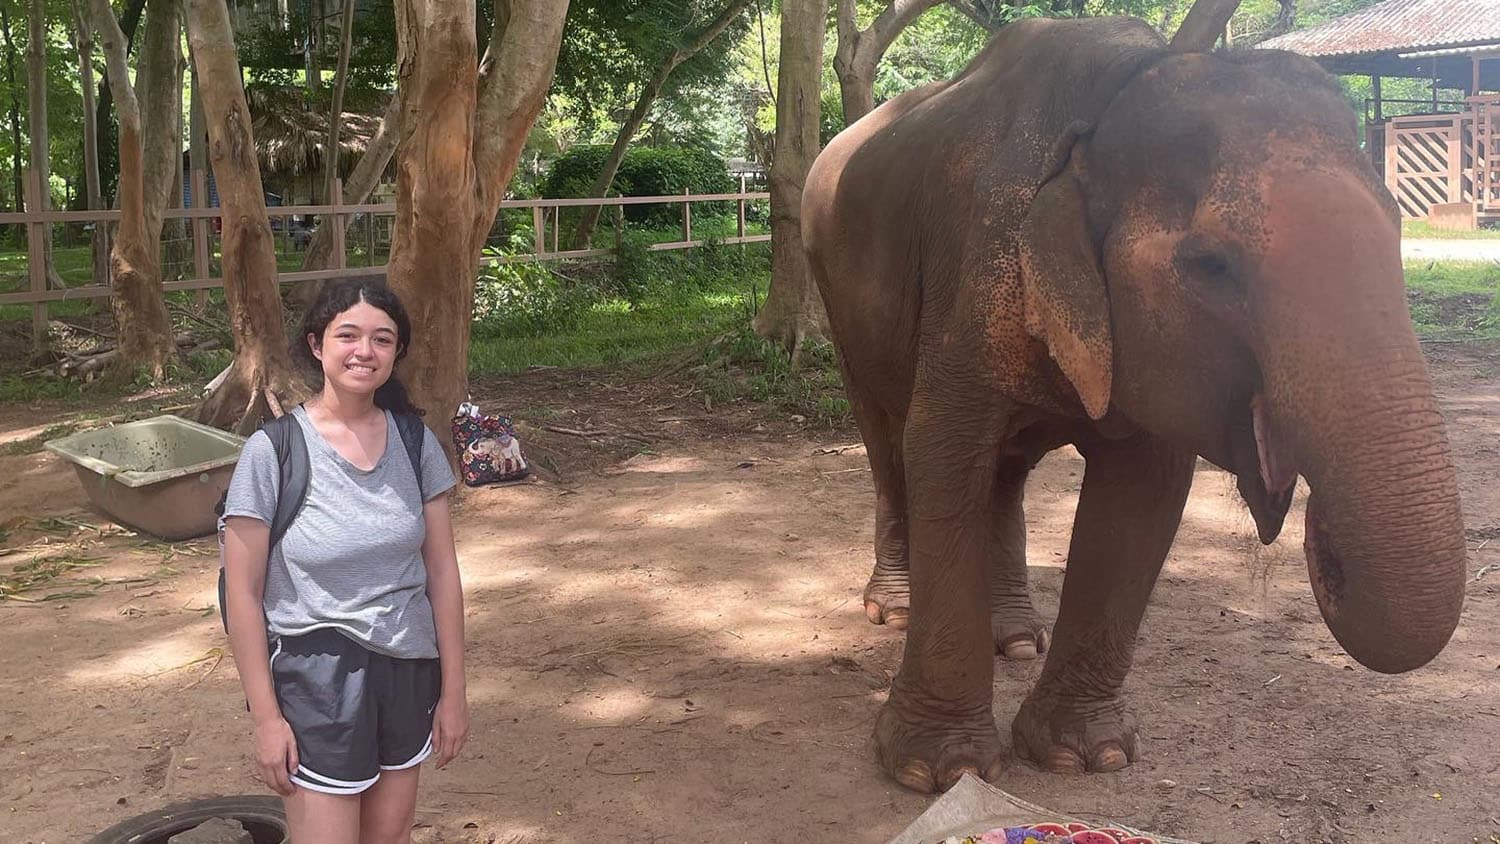 Brianna Diaz, an undergraduate researcher of animal health and an OUR Ambassador, stands beside a friendly elephant on a trip to research abroad.